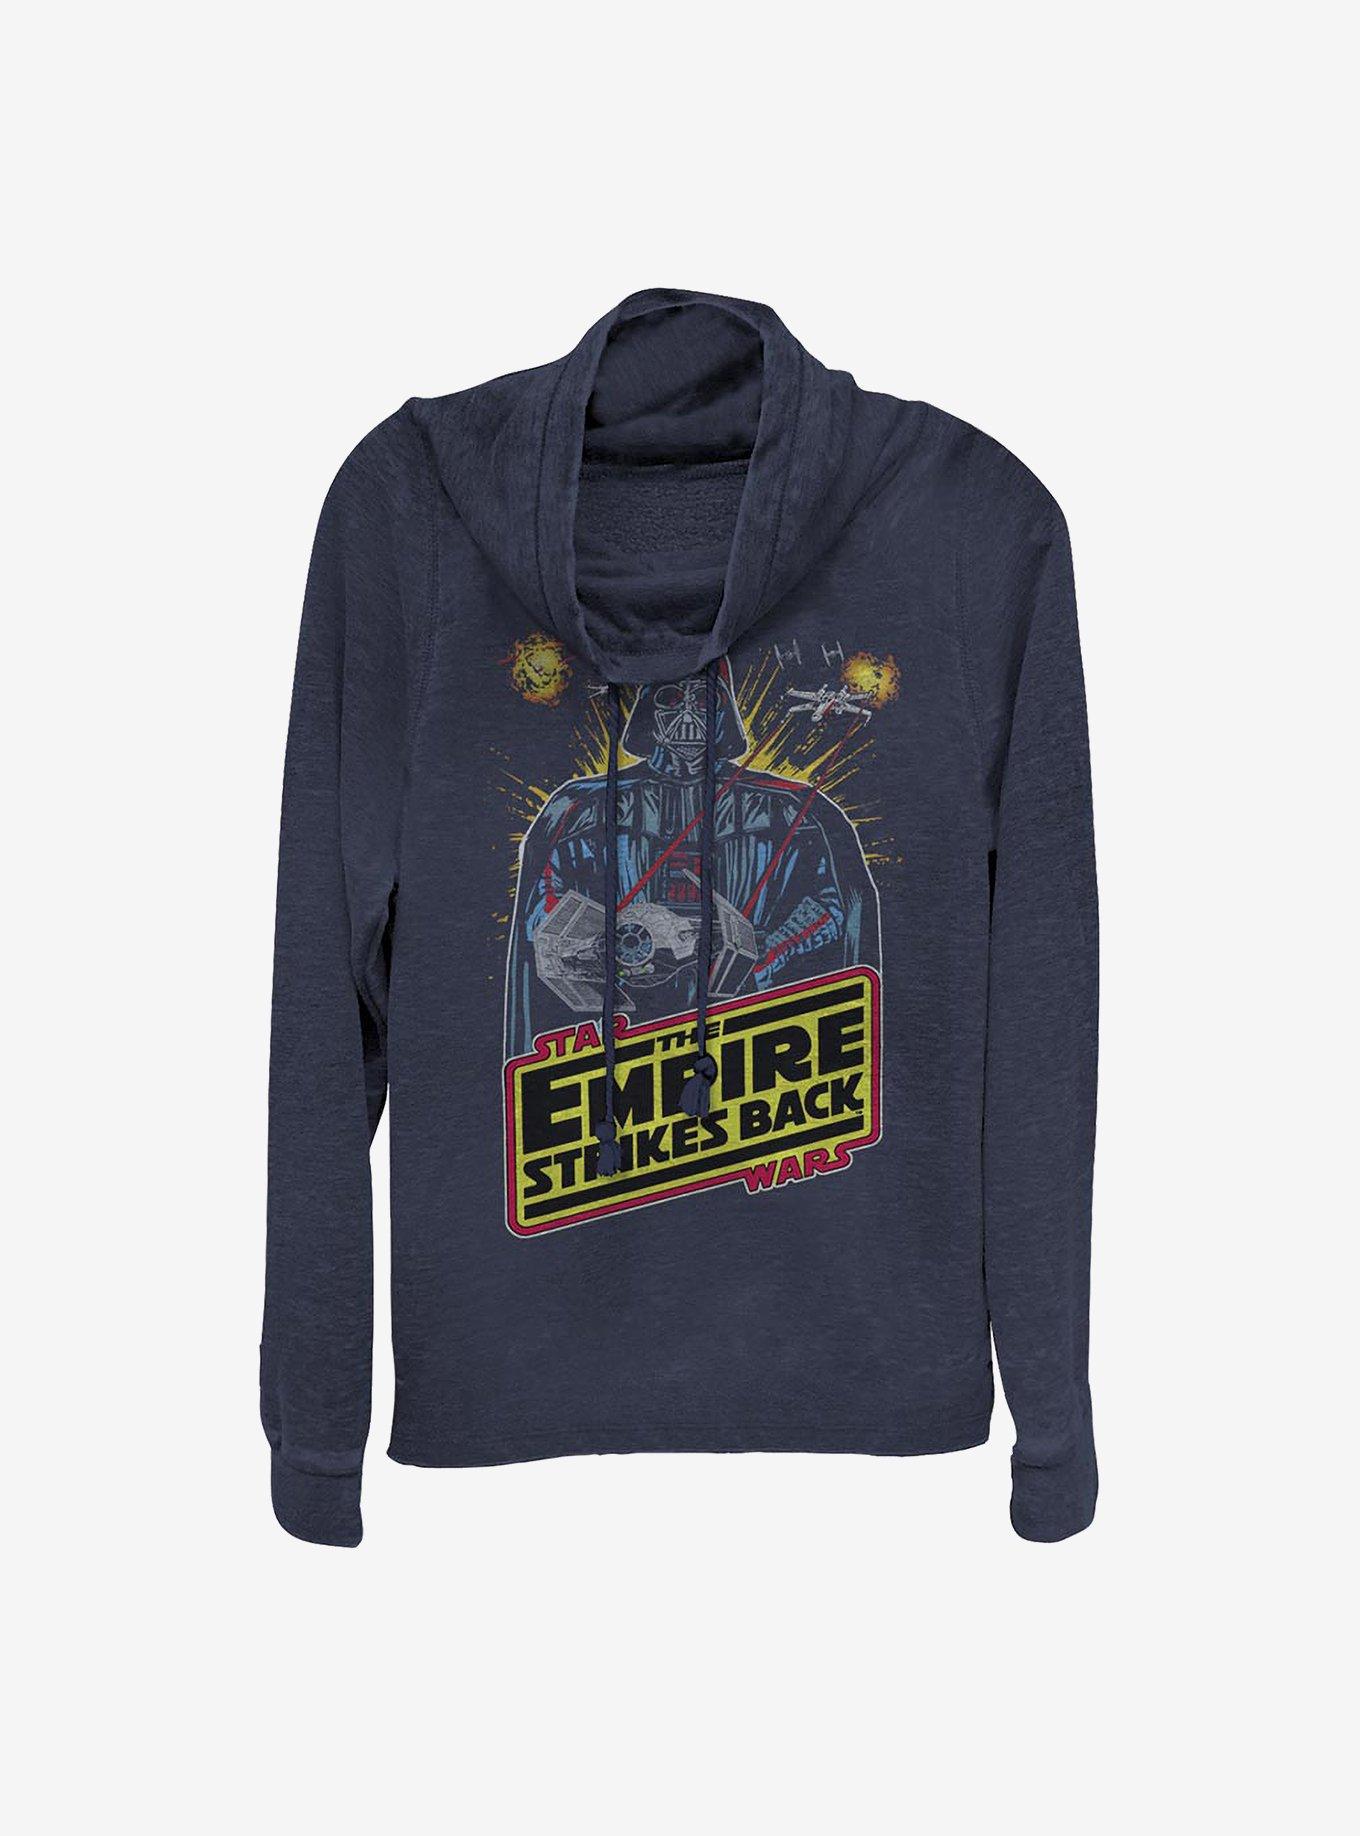 Star Wars The Empire Cowlneck Long-Sleeve Girls Top